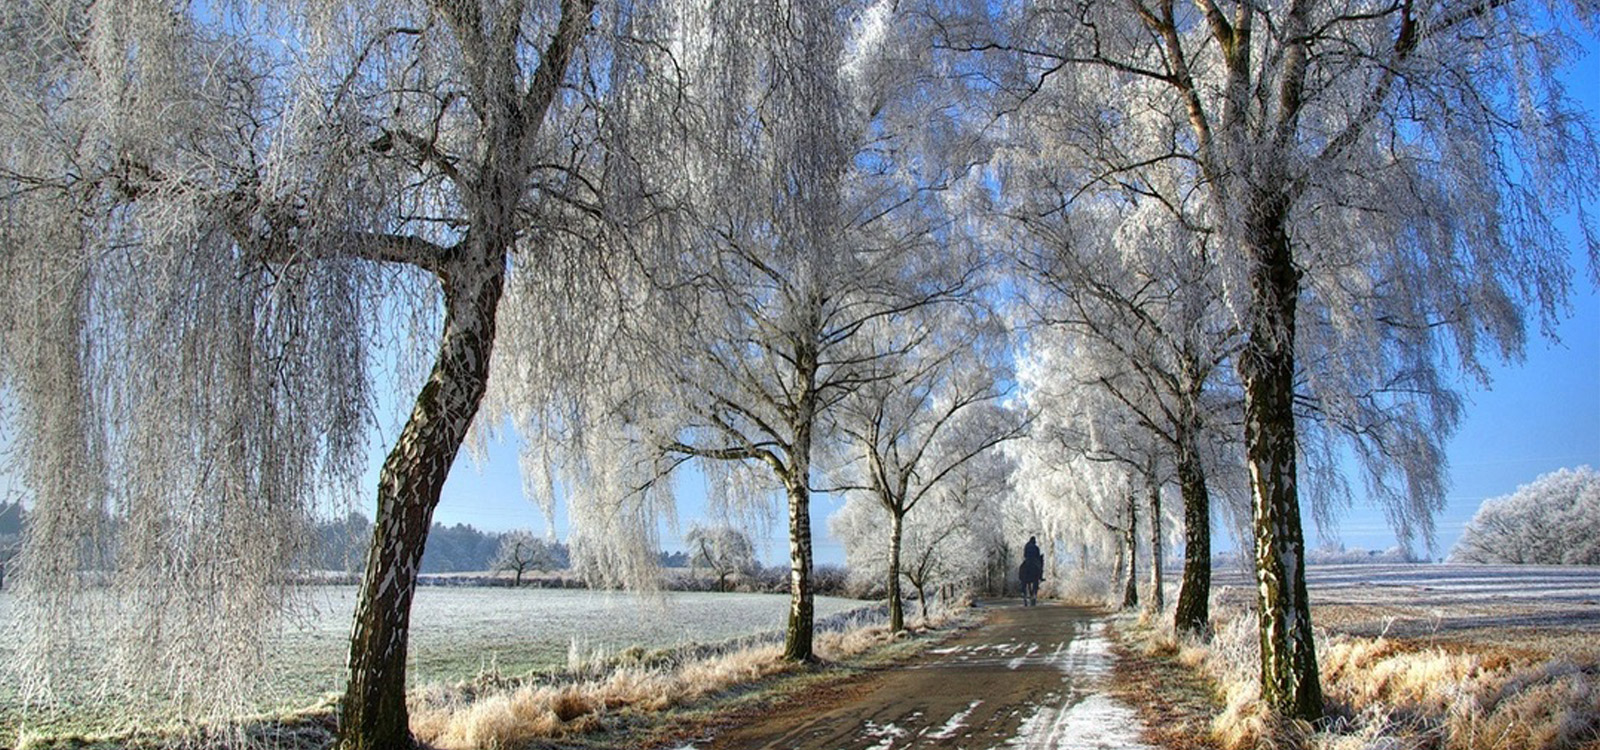 Trees in winter with ice